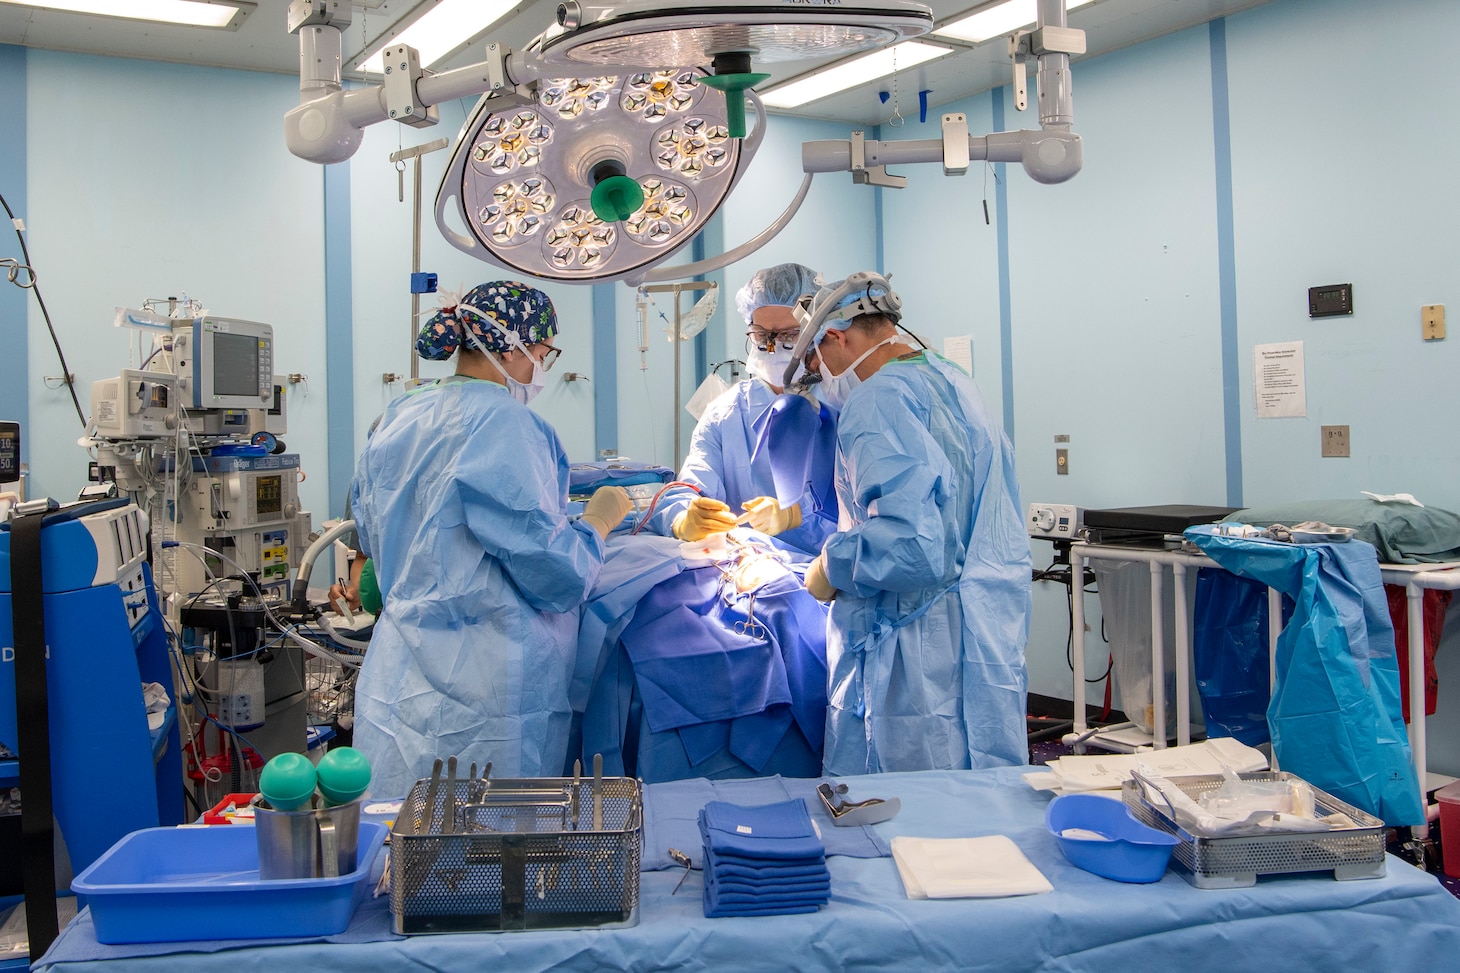 PUERTO PRINCESA, Philippines (Aug. 5, 2022) – U.S. Navy medical professionals perform a cleft palate repair surgery aboard Military Sealift Command hospital ship USNS Mercy (T-AH 19) during Pacific Partnership 2022.